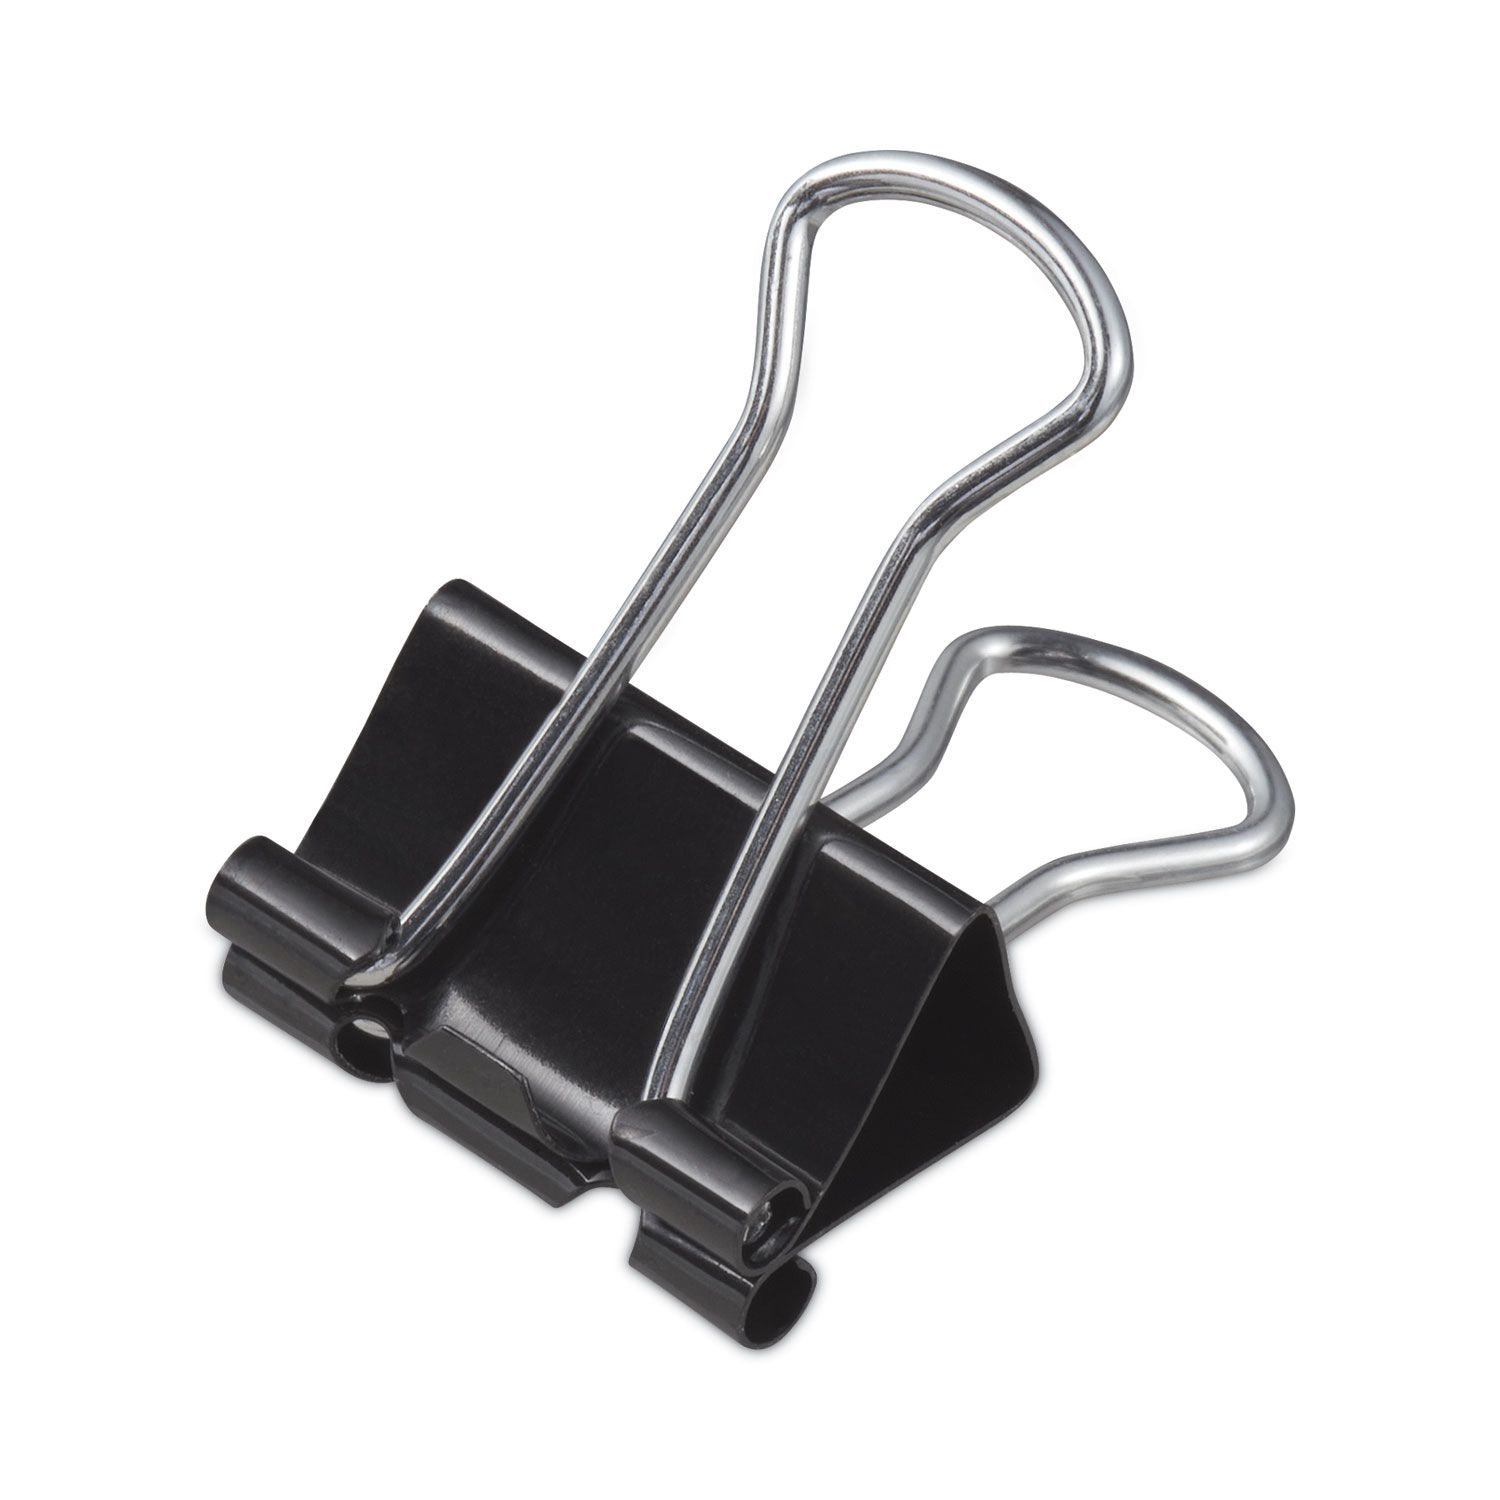 Binder Clip Package - $25 Gift Certificate - Wurth Organizing